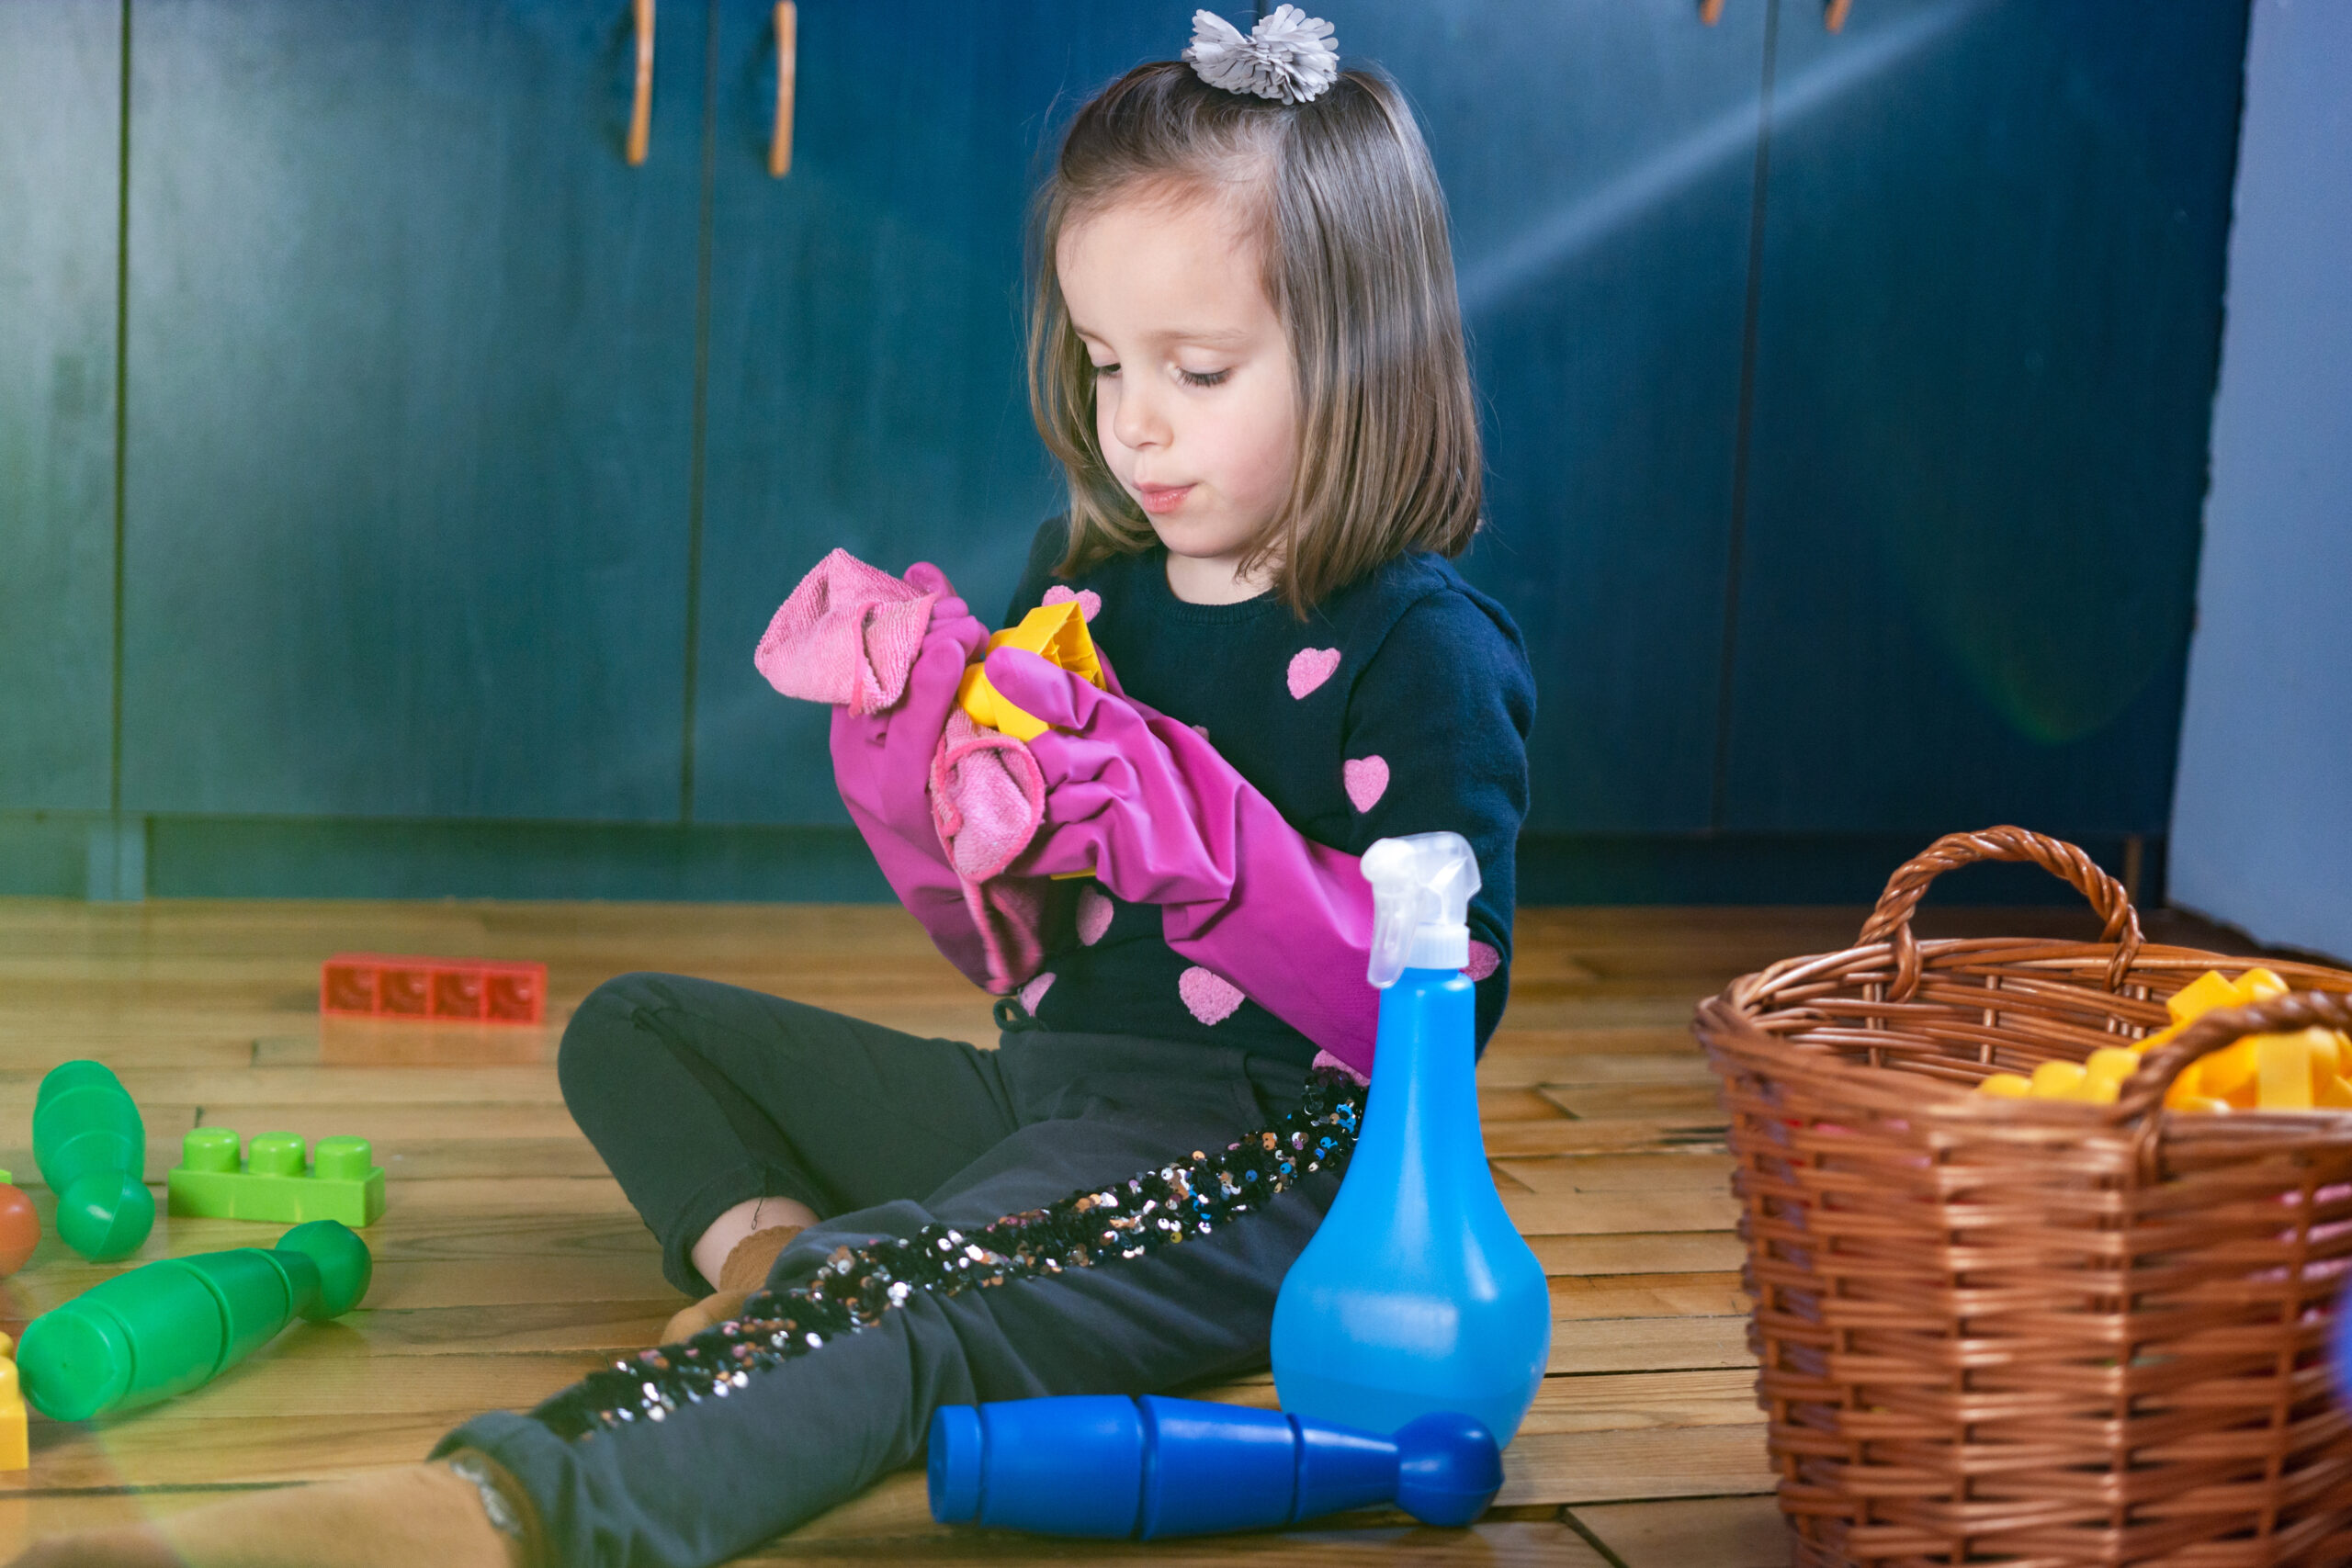 A child sitting on the floor with a spray bottle beside her while she wears oversized gloves to clean her toys